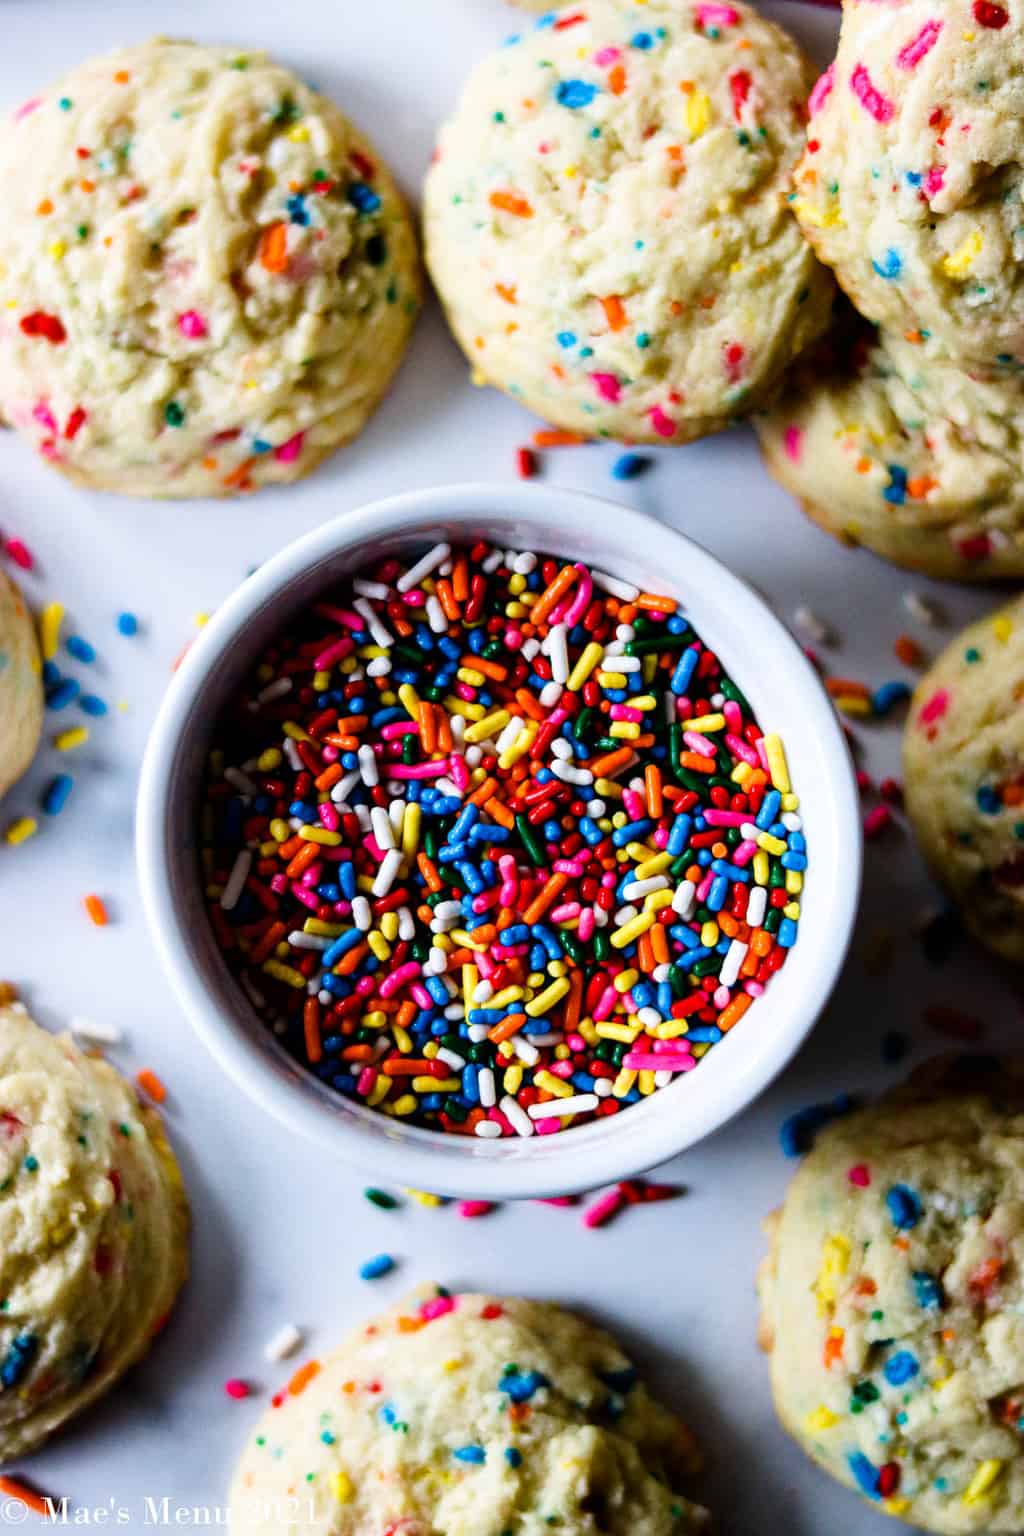 An up-close shot of a dish of rainbow sprinkles surrounded by birthday cake cookies